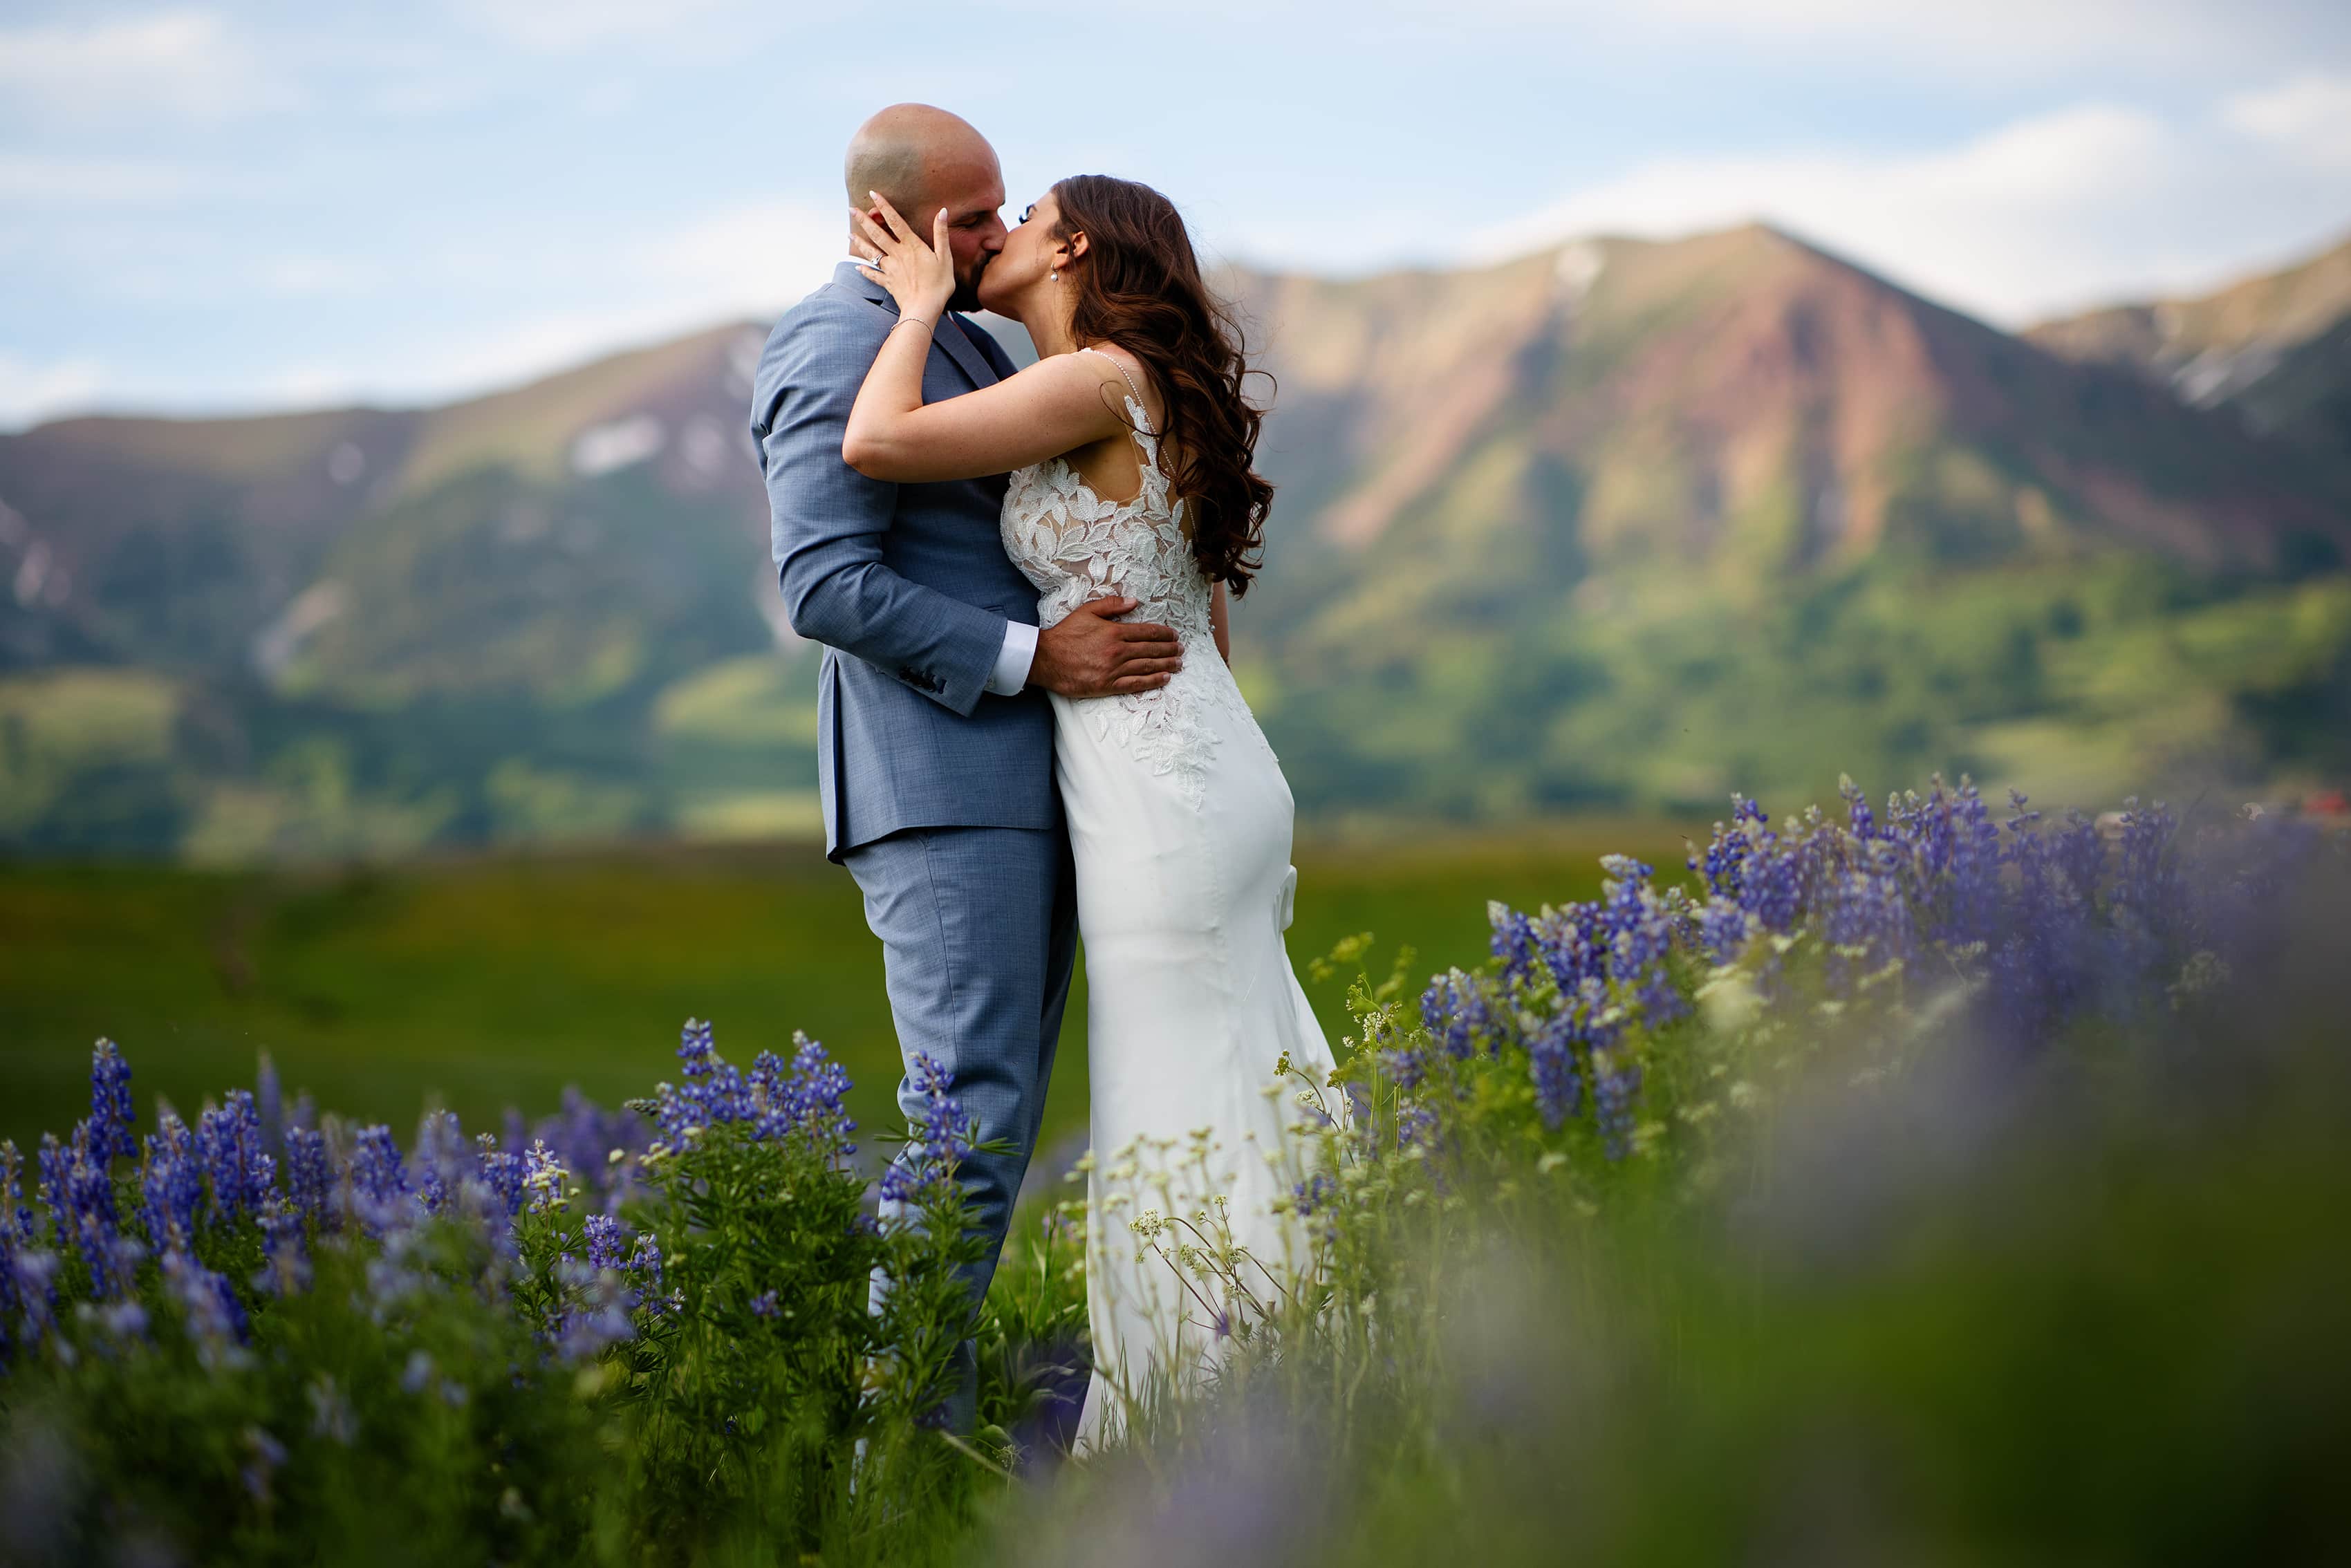 Michael and Sarah share a kiss in a field of wildflowers